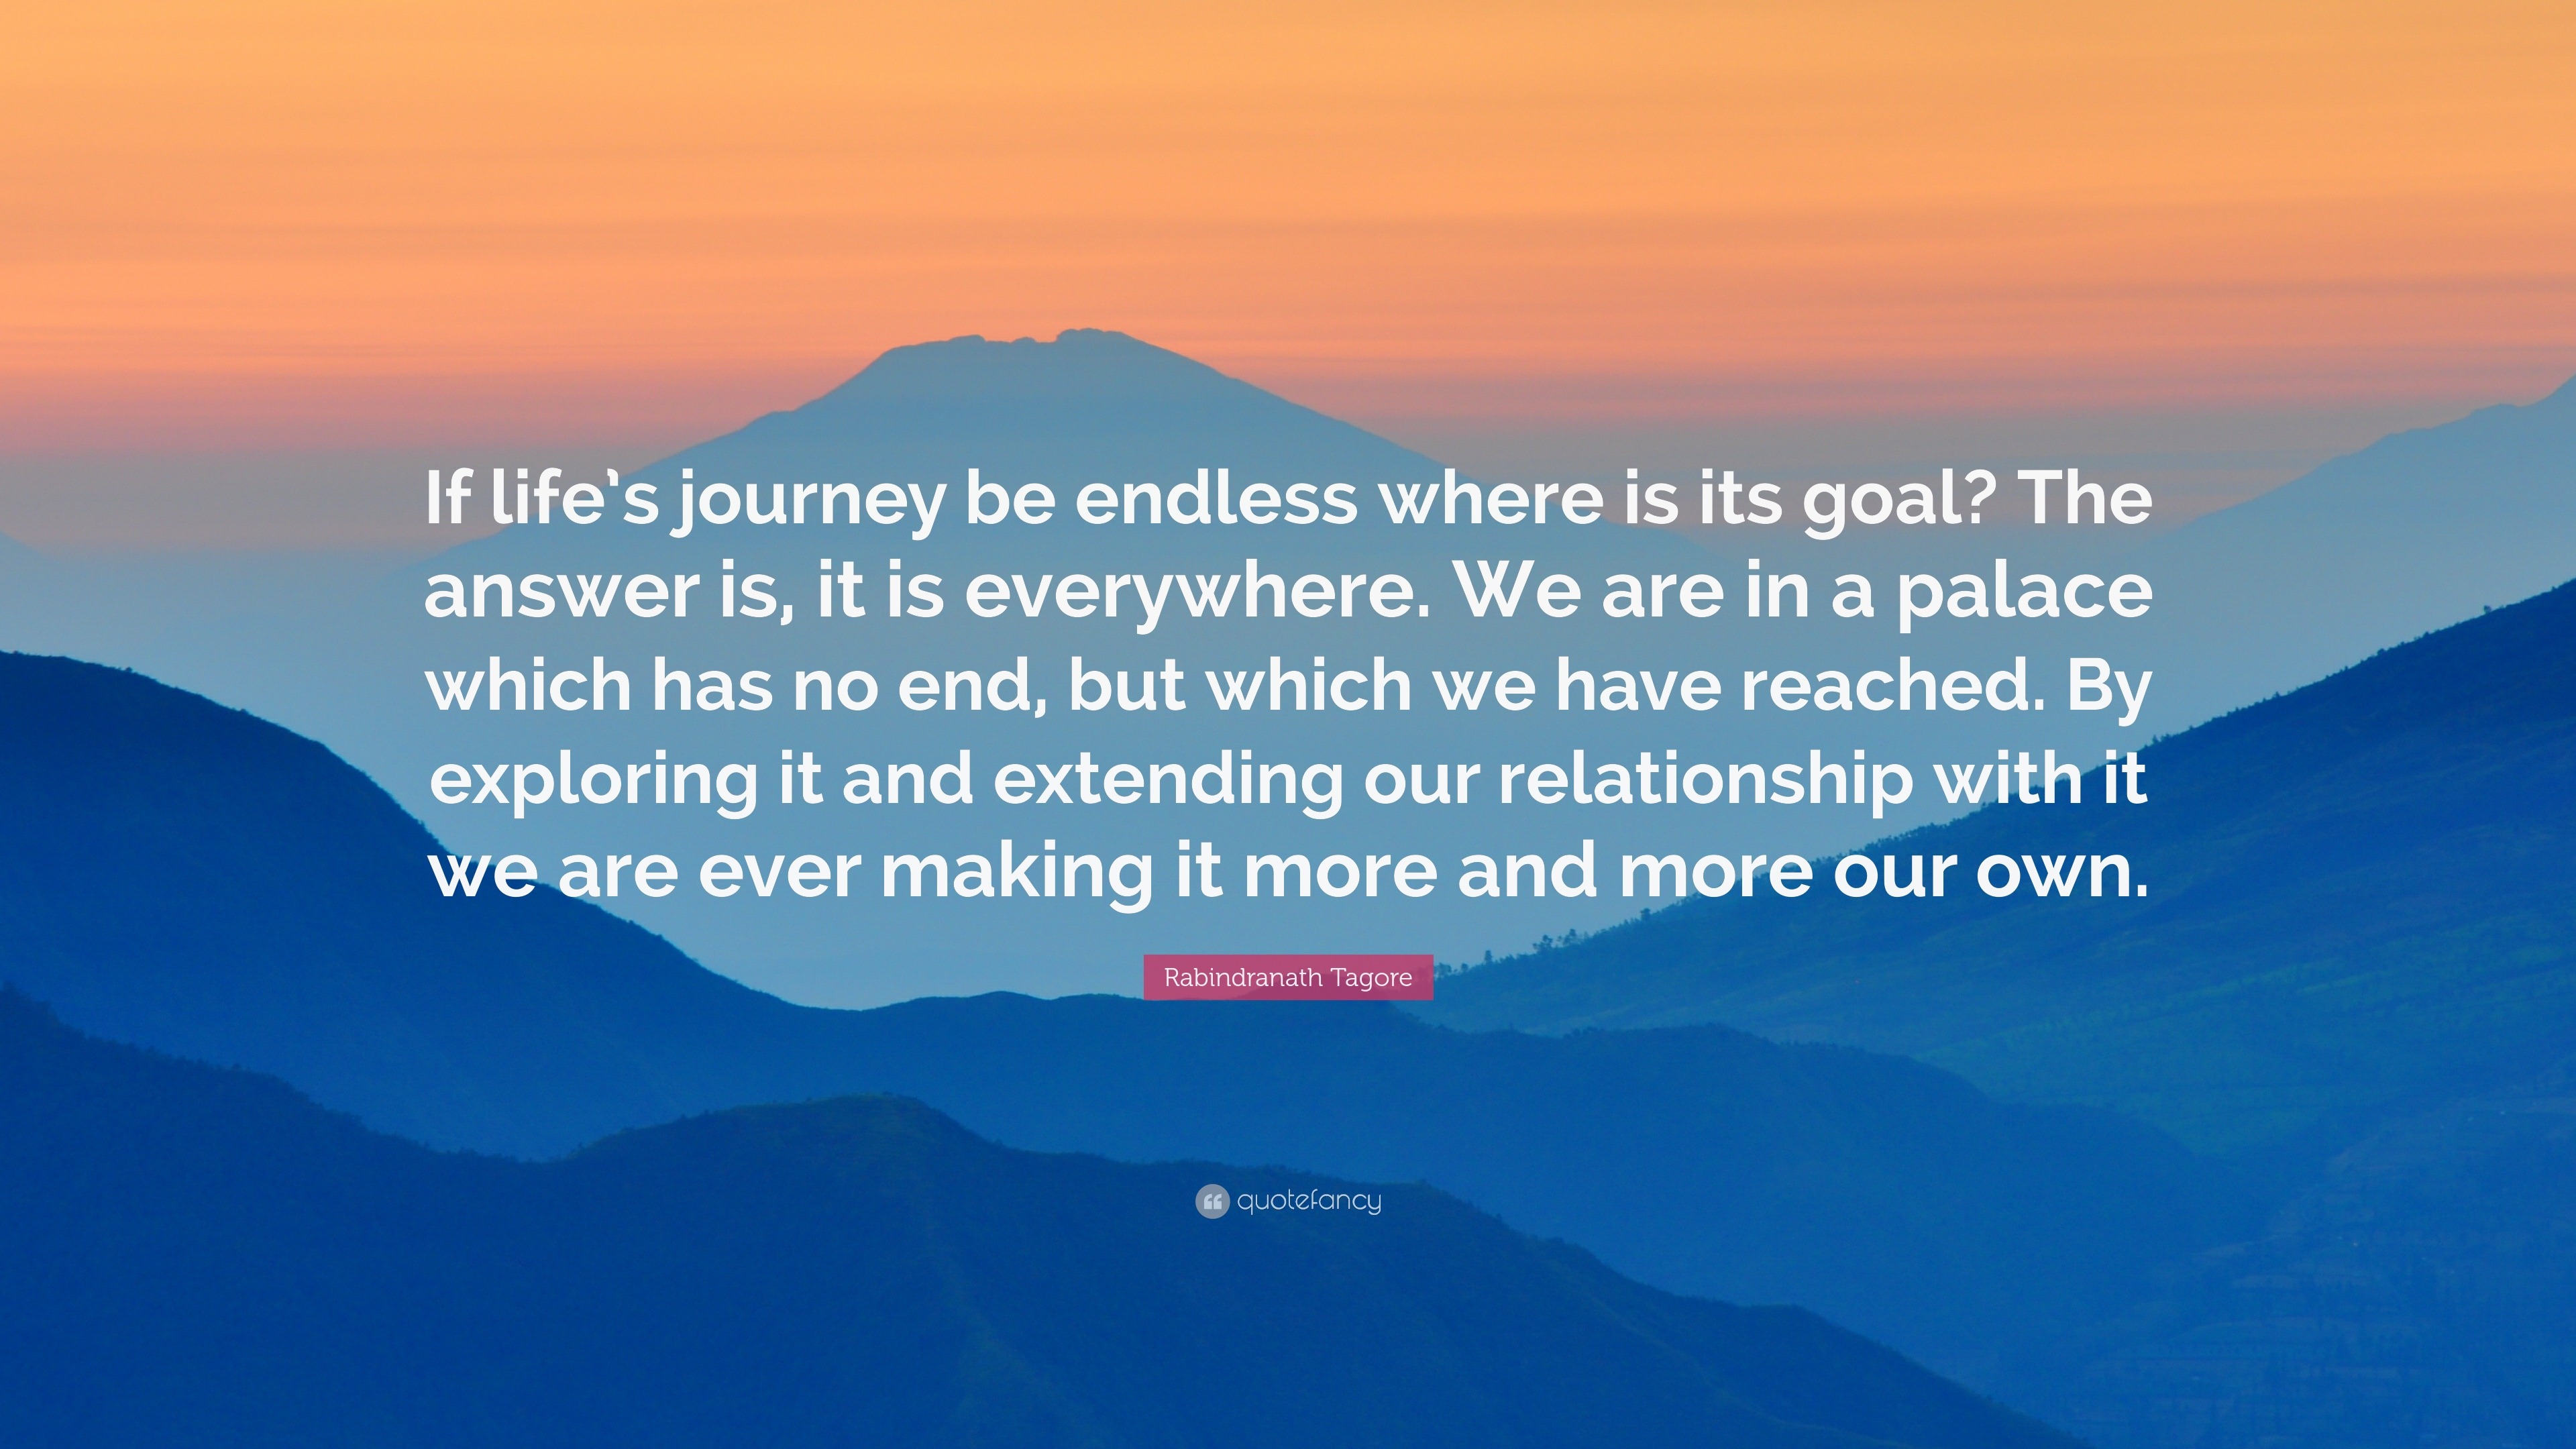 Rabindranath Tagore Quote “If life s journey be endless where is its goal The